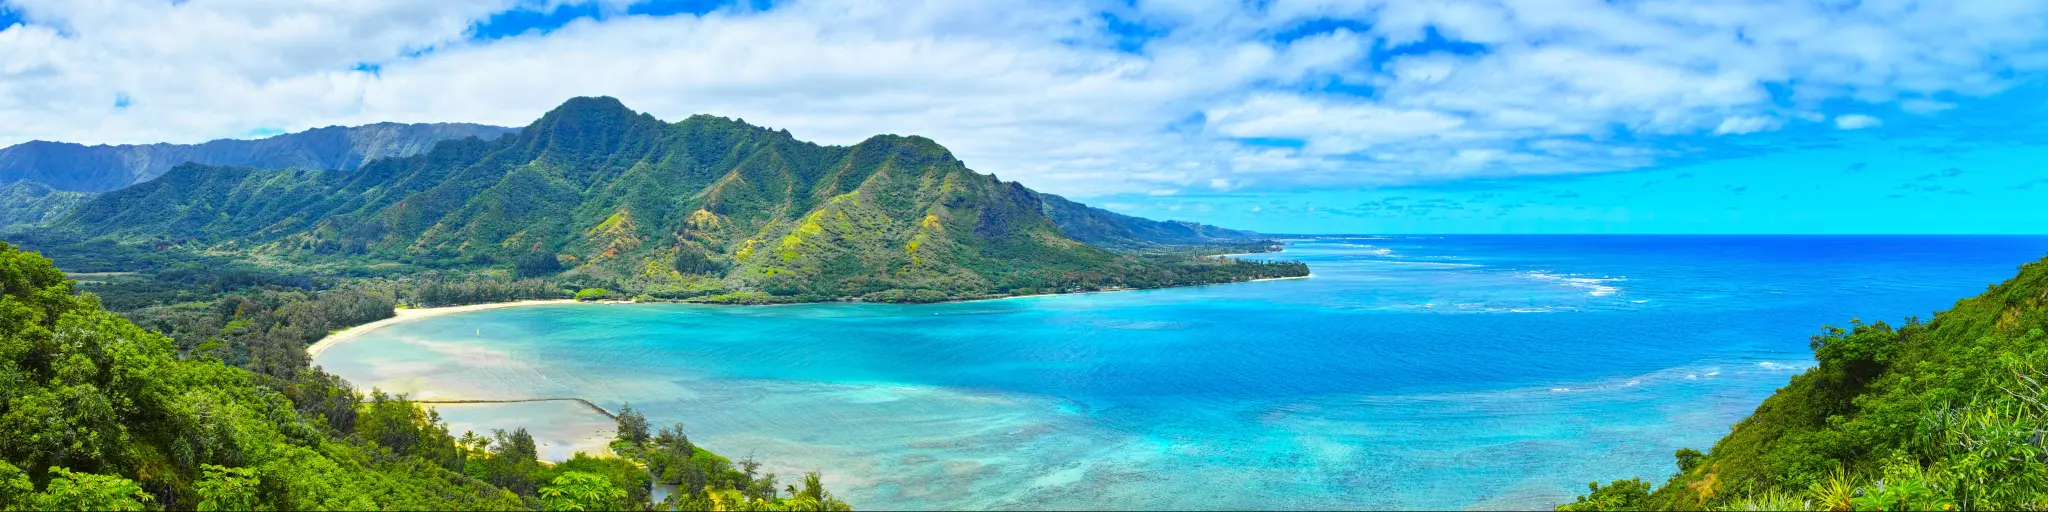 Panoramic view of the coastline from the hike to Crouching Lion Rock in Hawaii, with clear turquoise waters